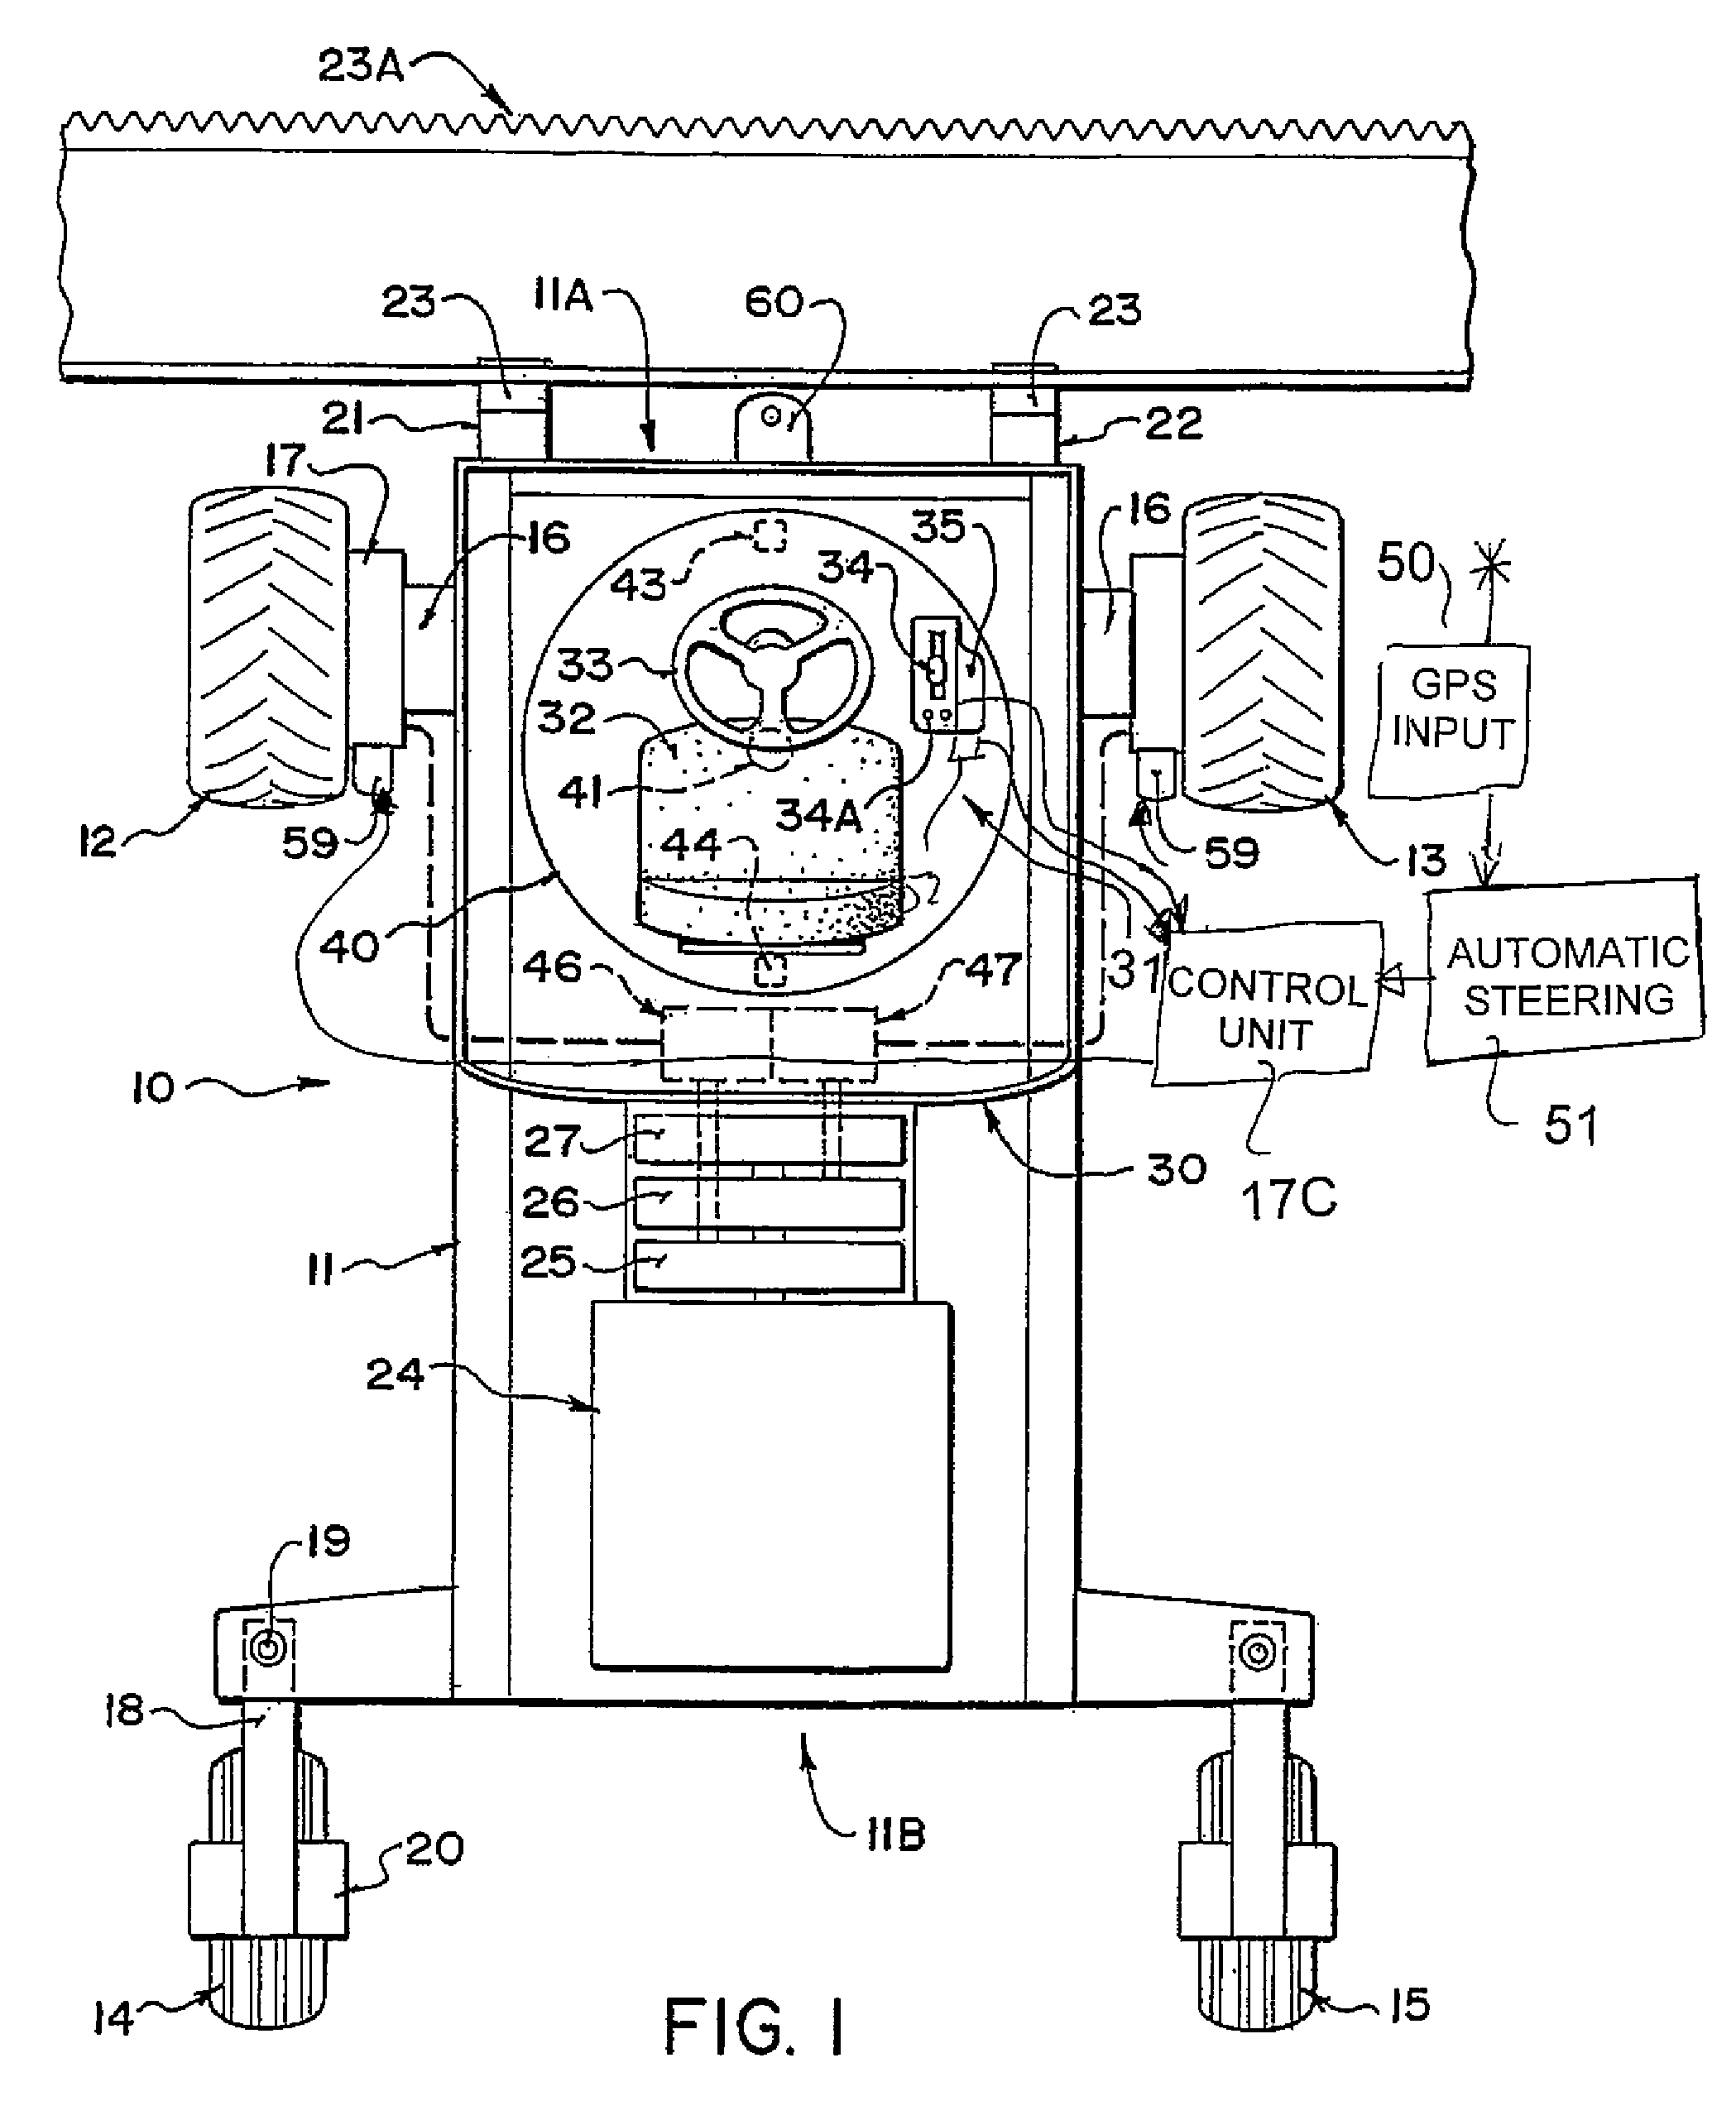 Speed and steering control of a hydraulically driven tractor